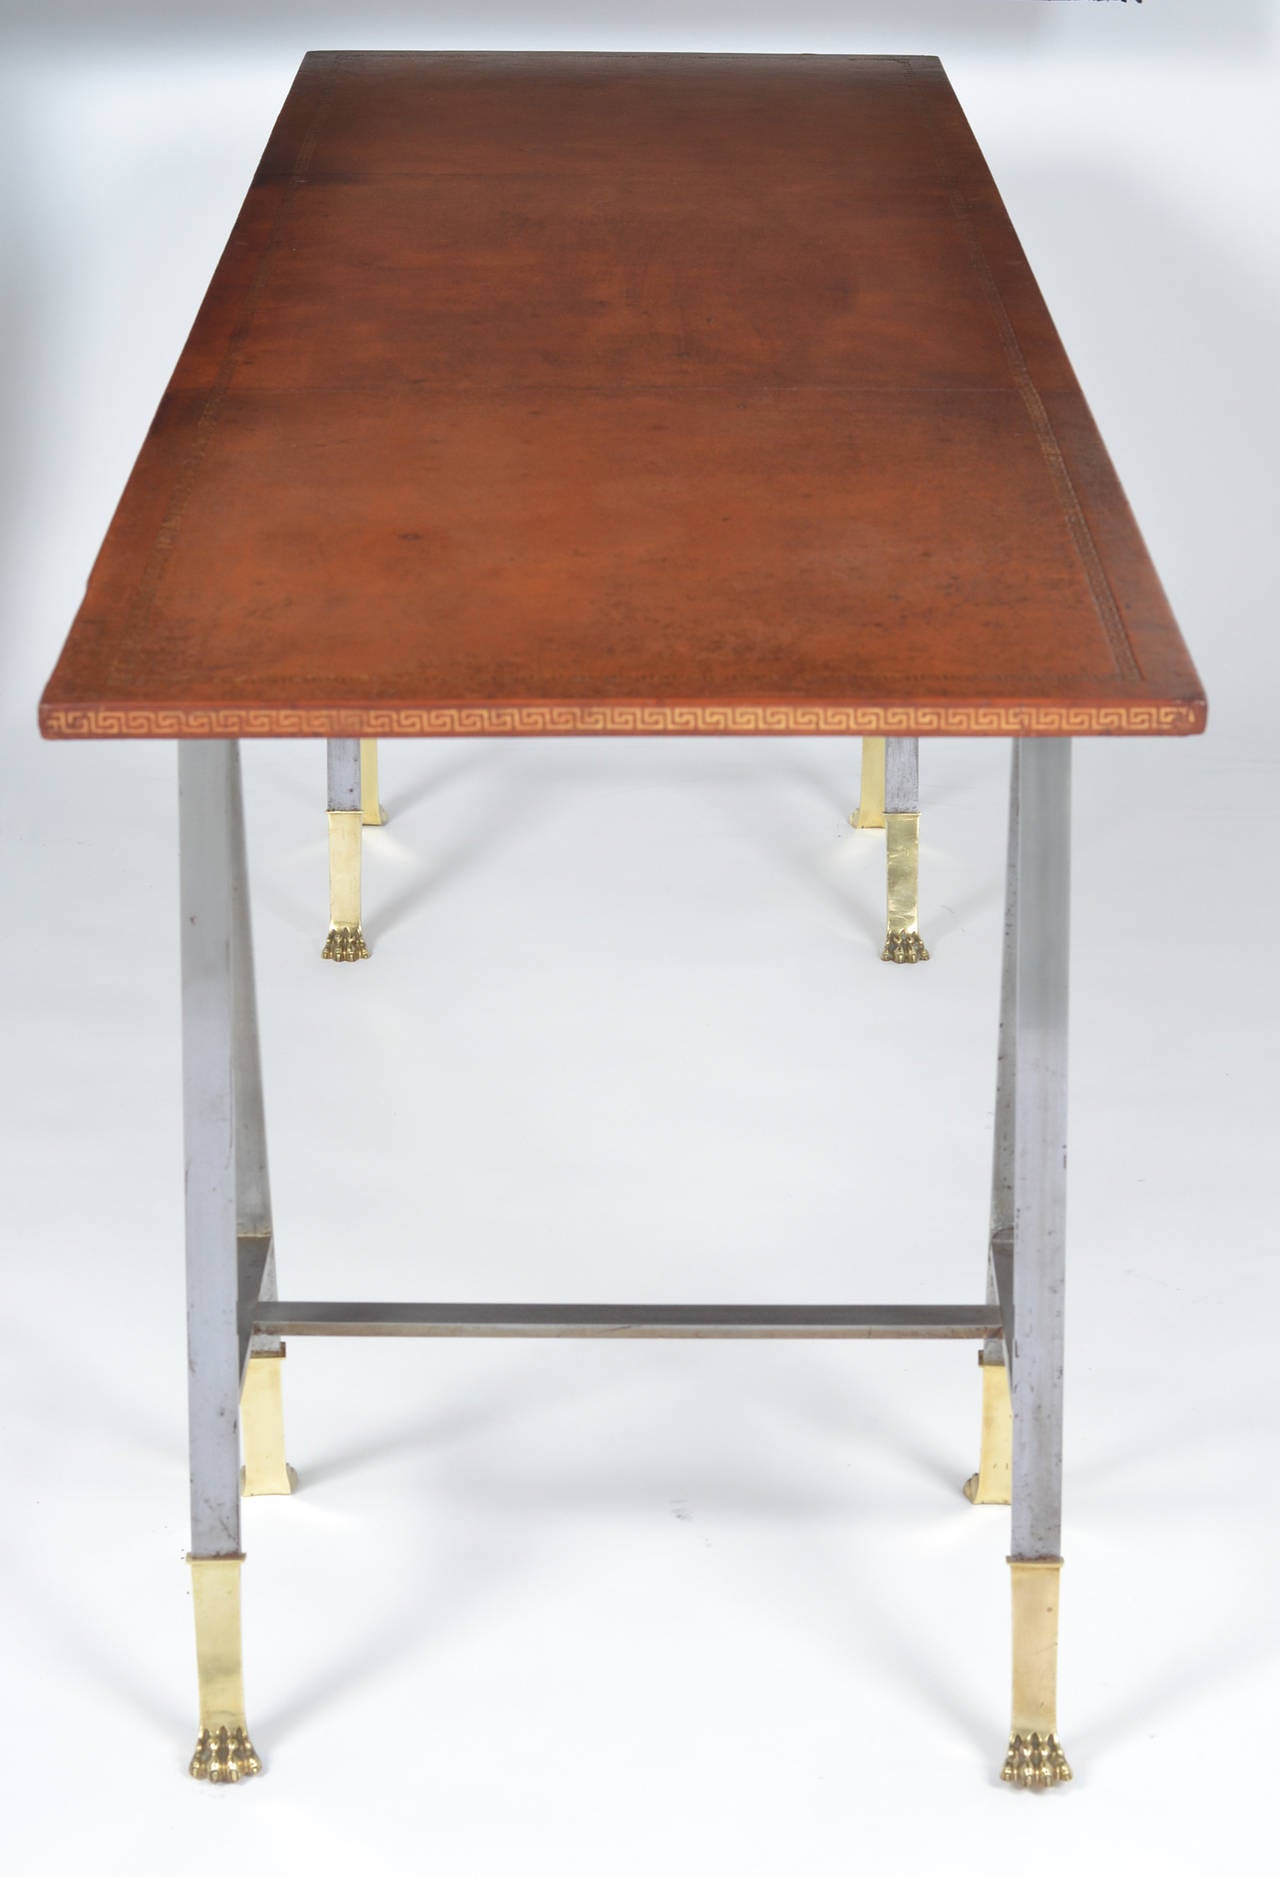 20th Century Viennese Leather-Top, Diamond Trader Table